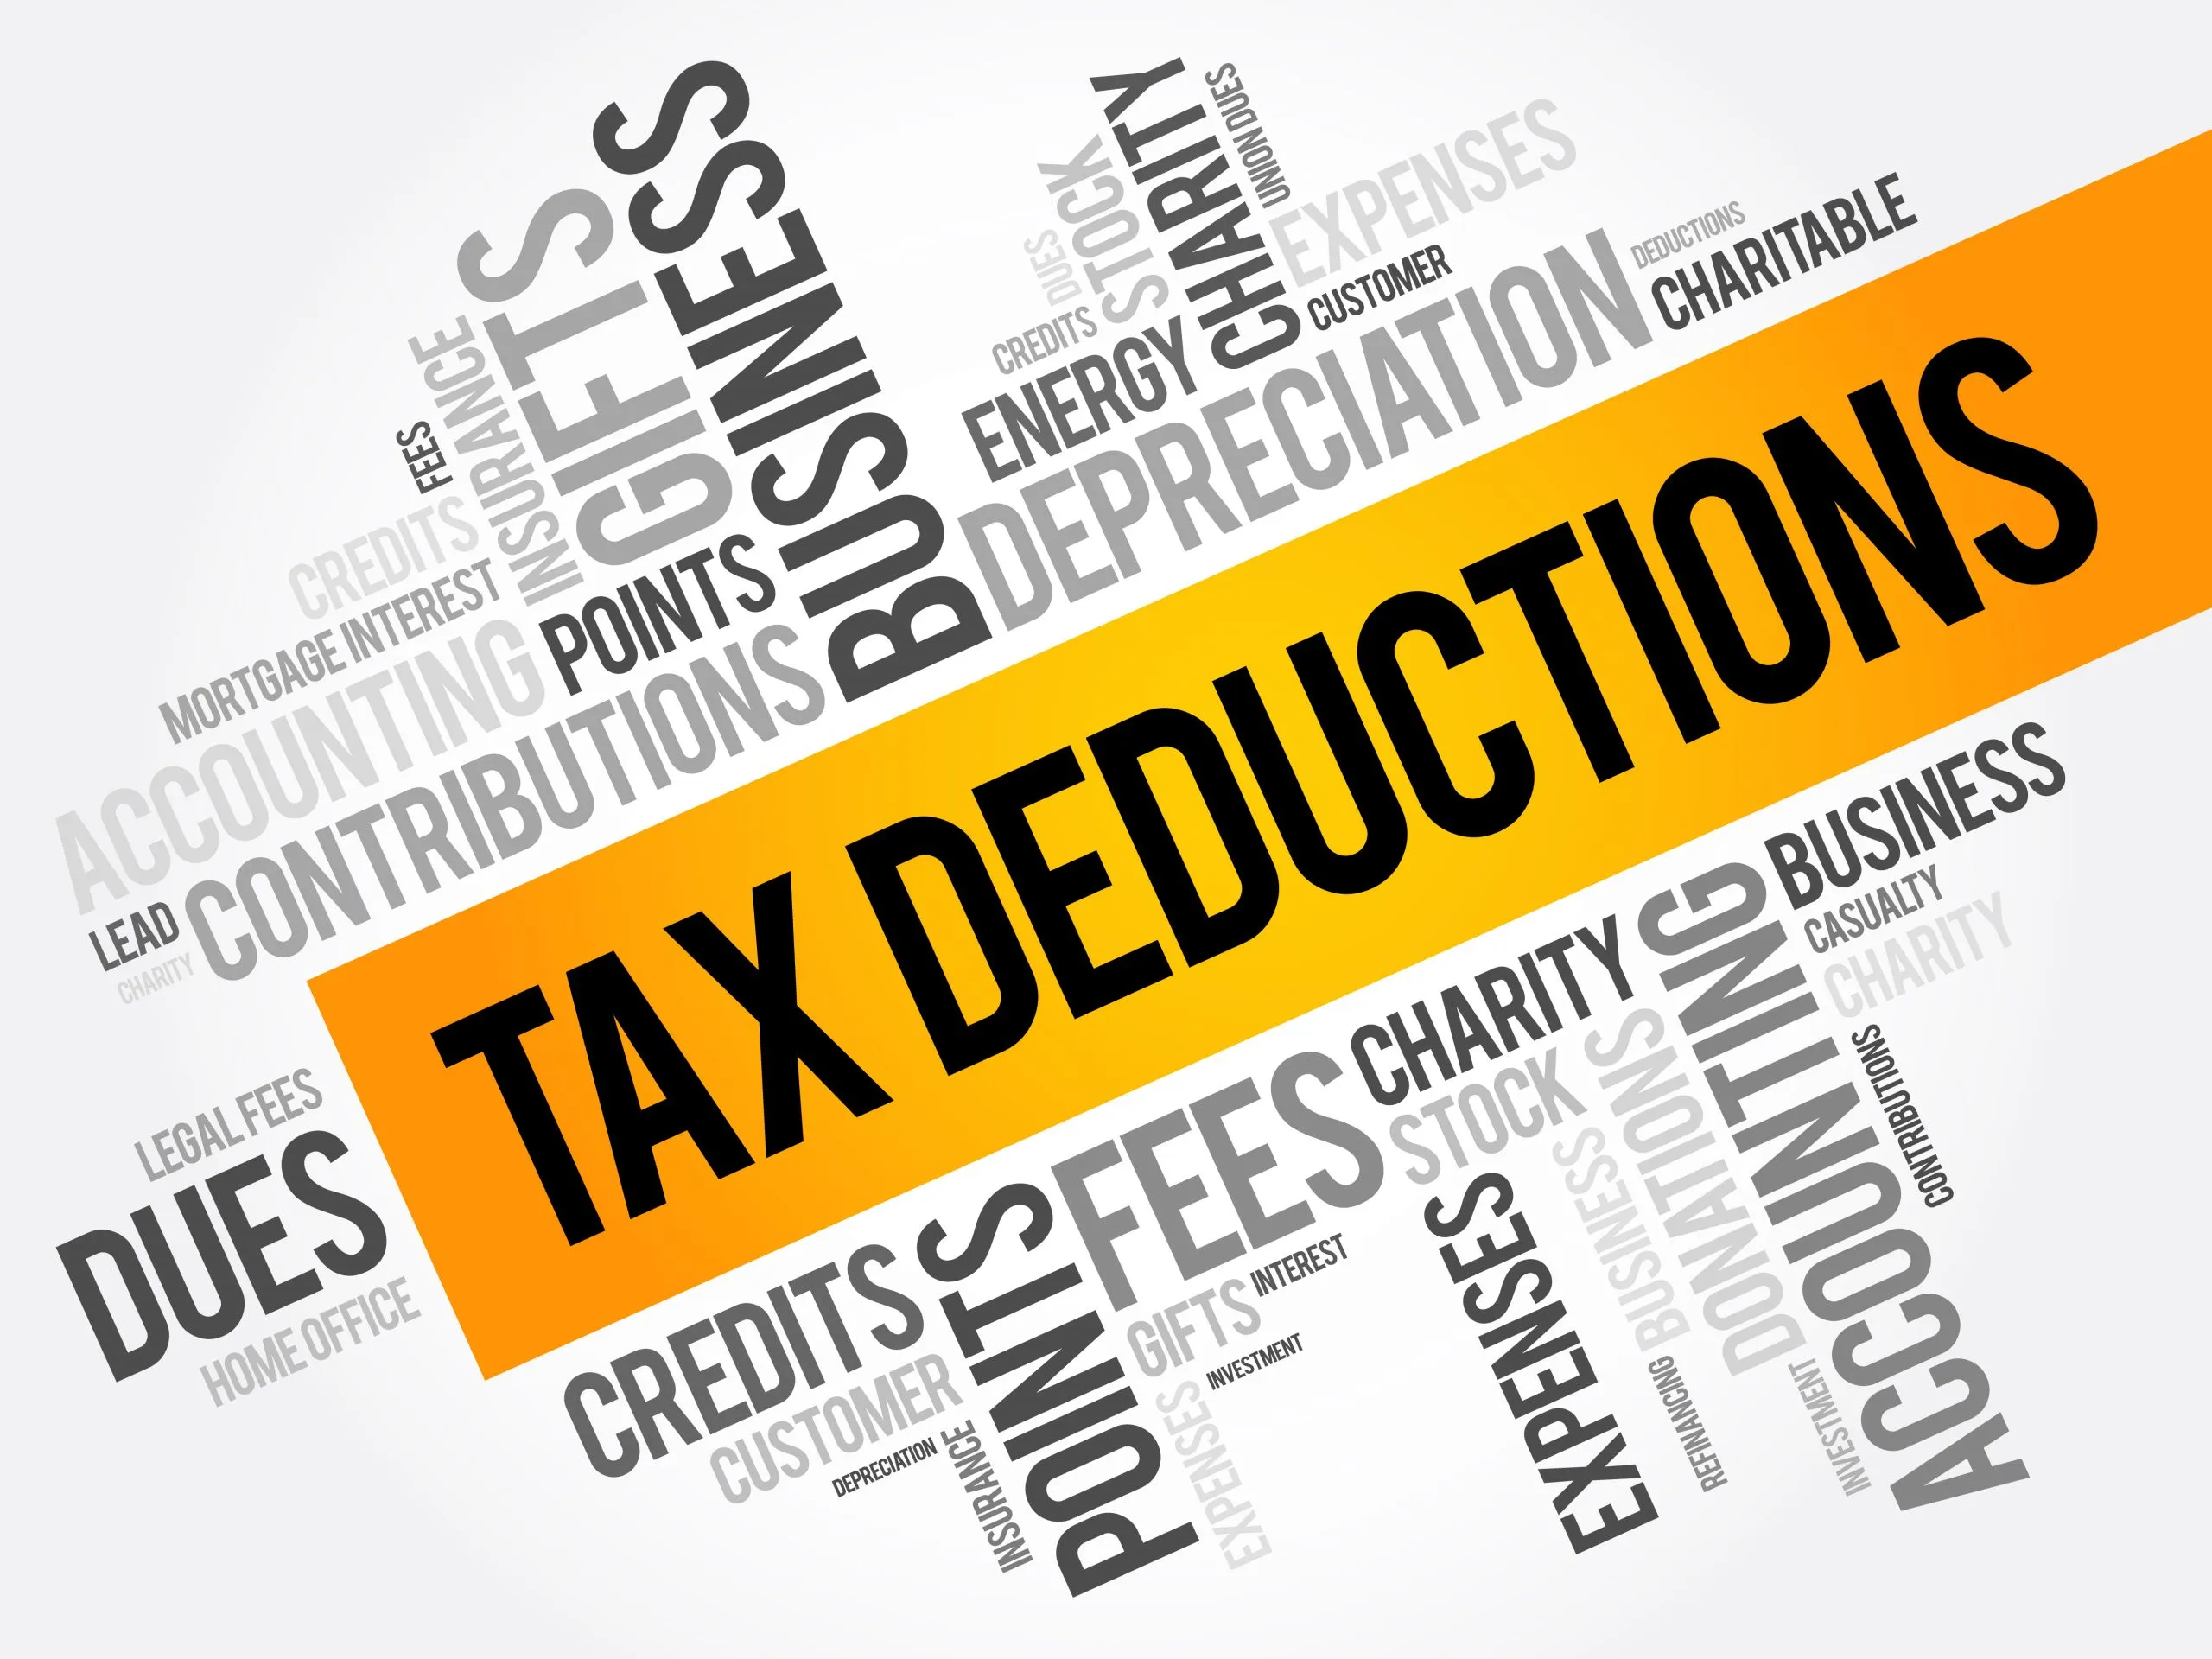 Tax Deductions, Depreciation, Charitable Gifting, Business Credits and Write Downs